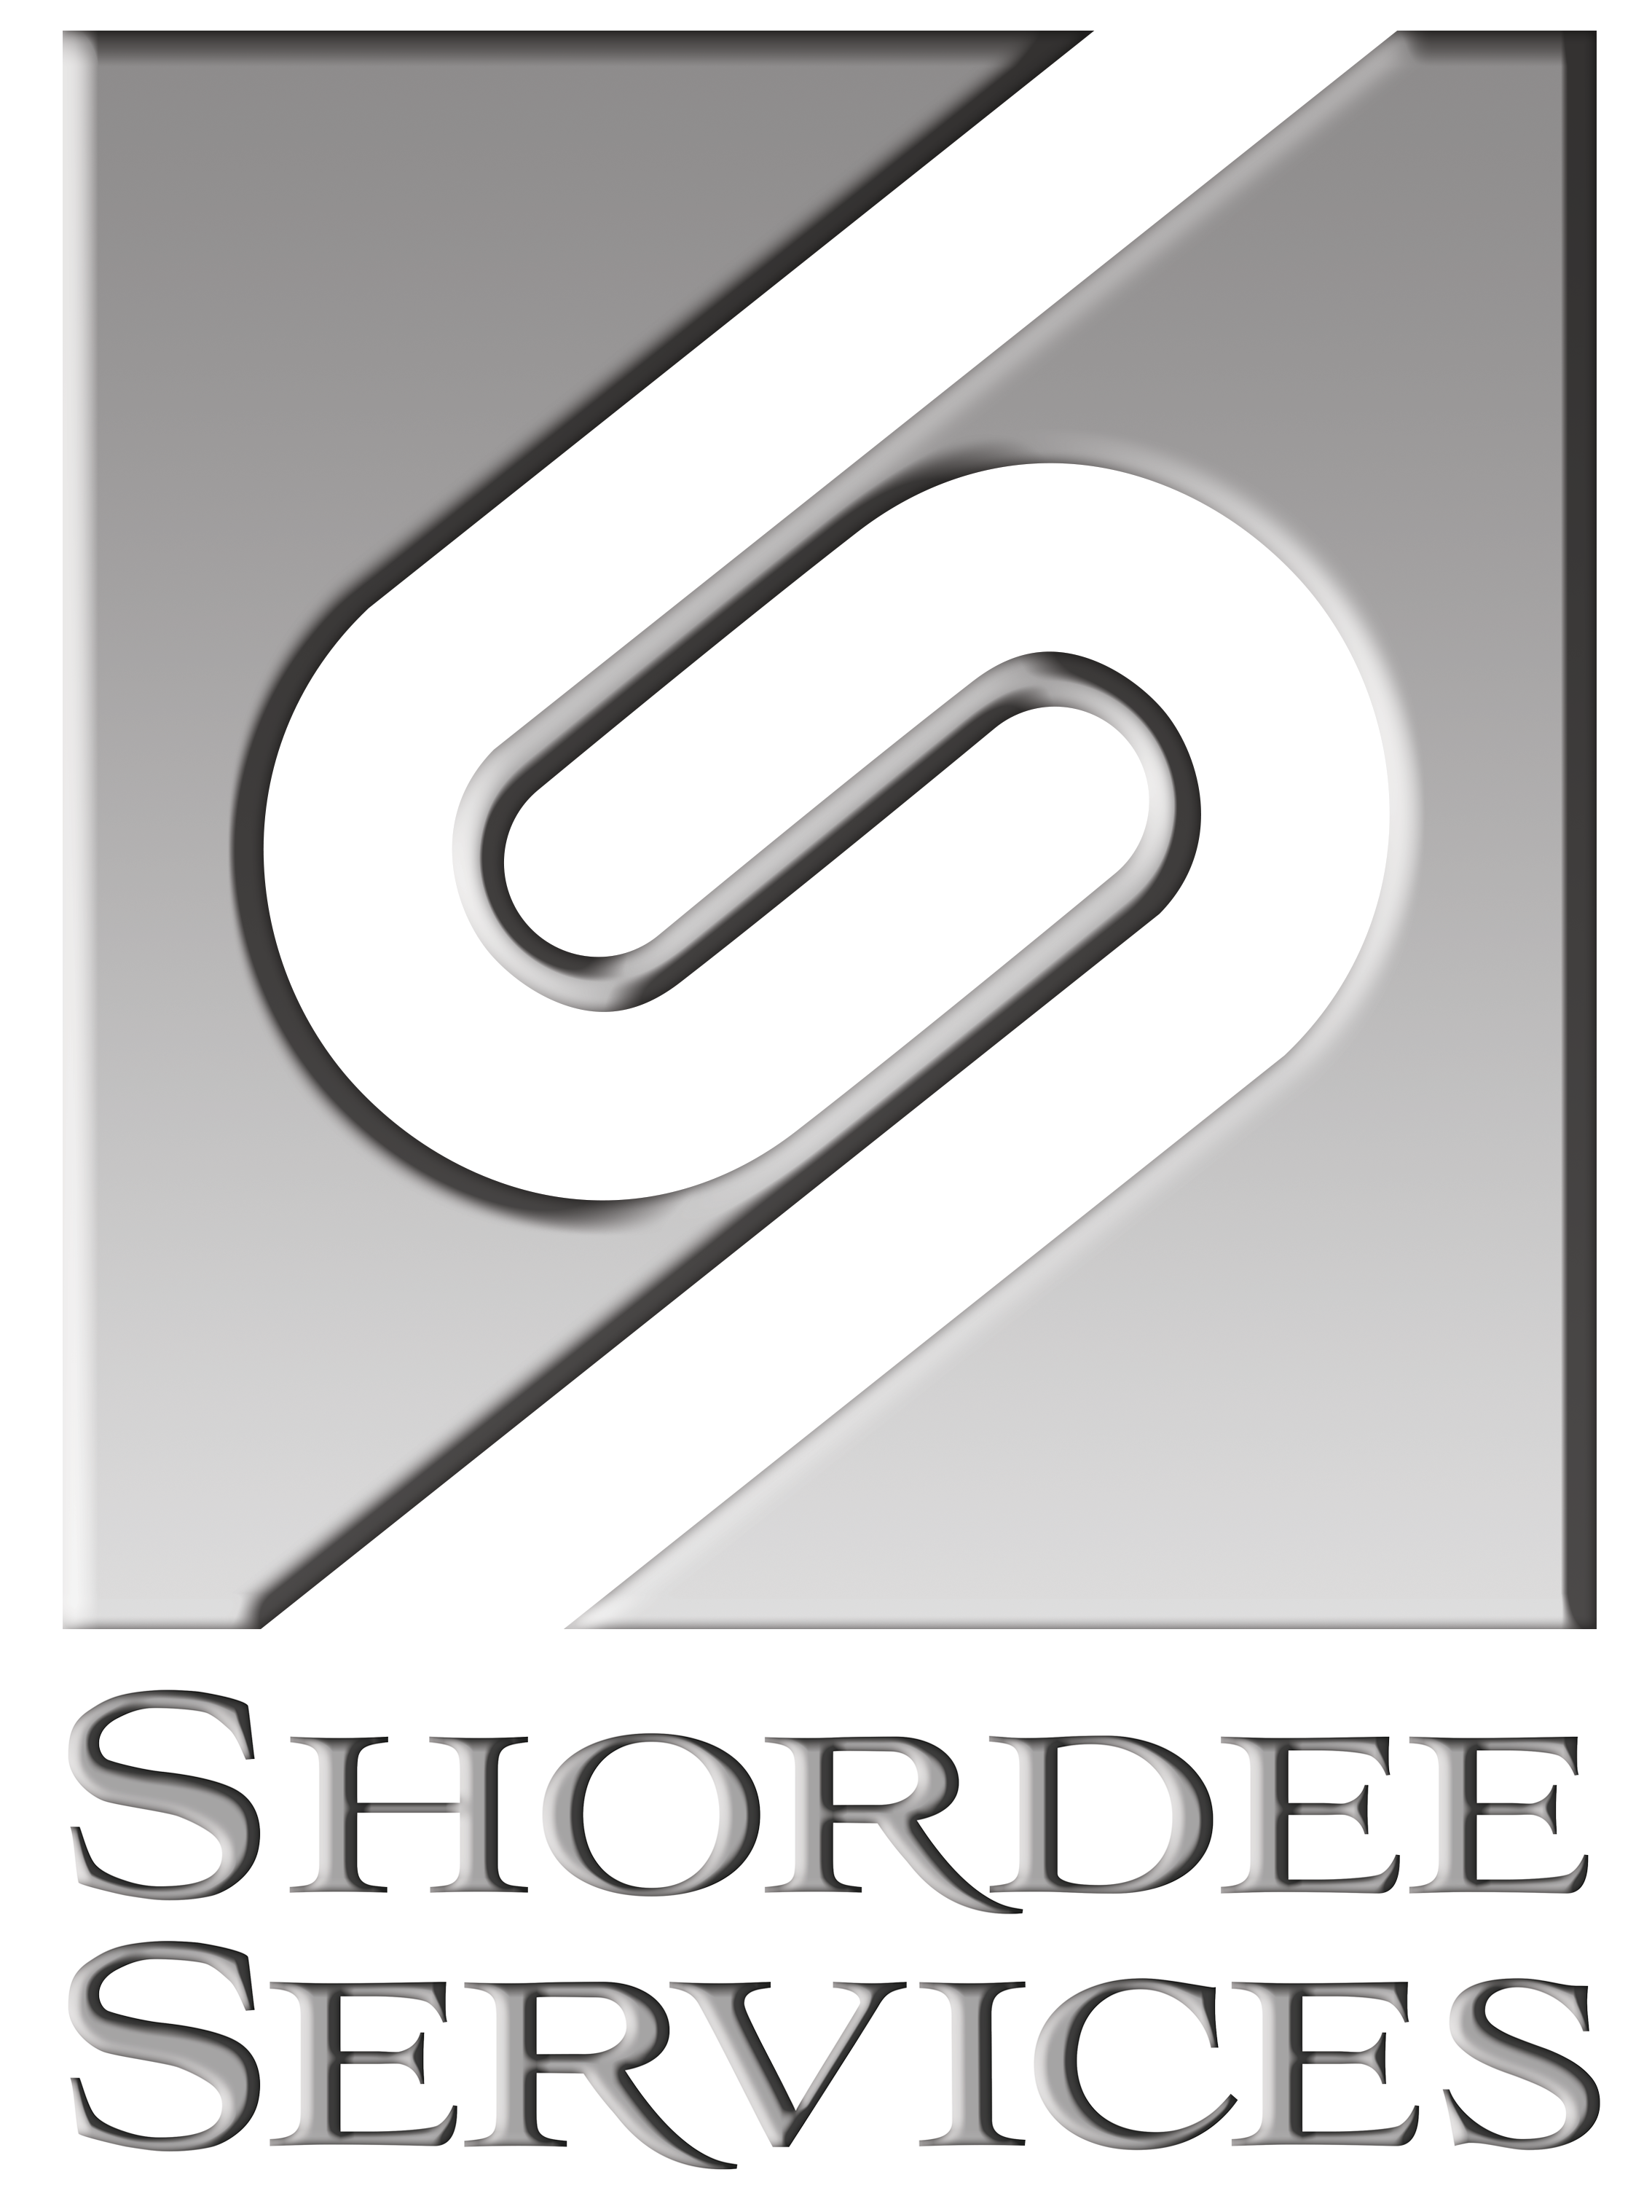 Shordee Services